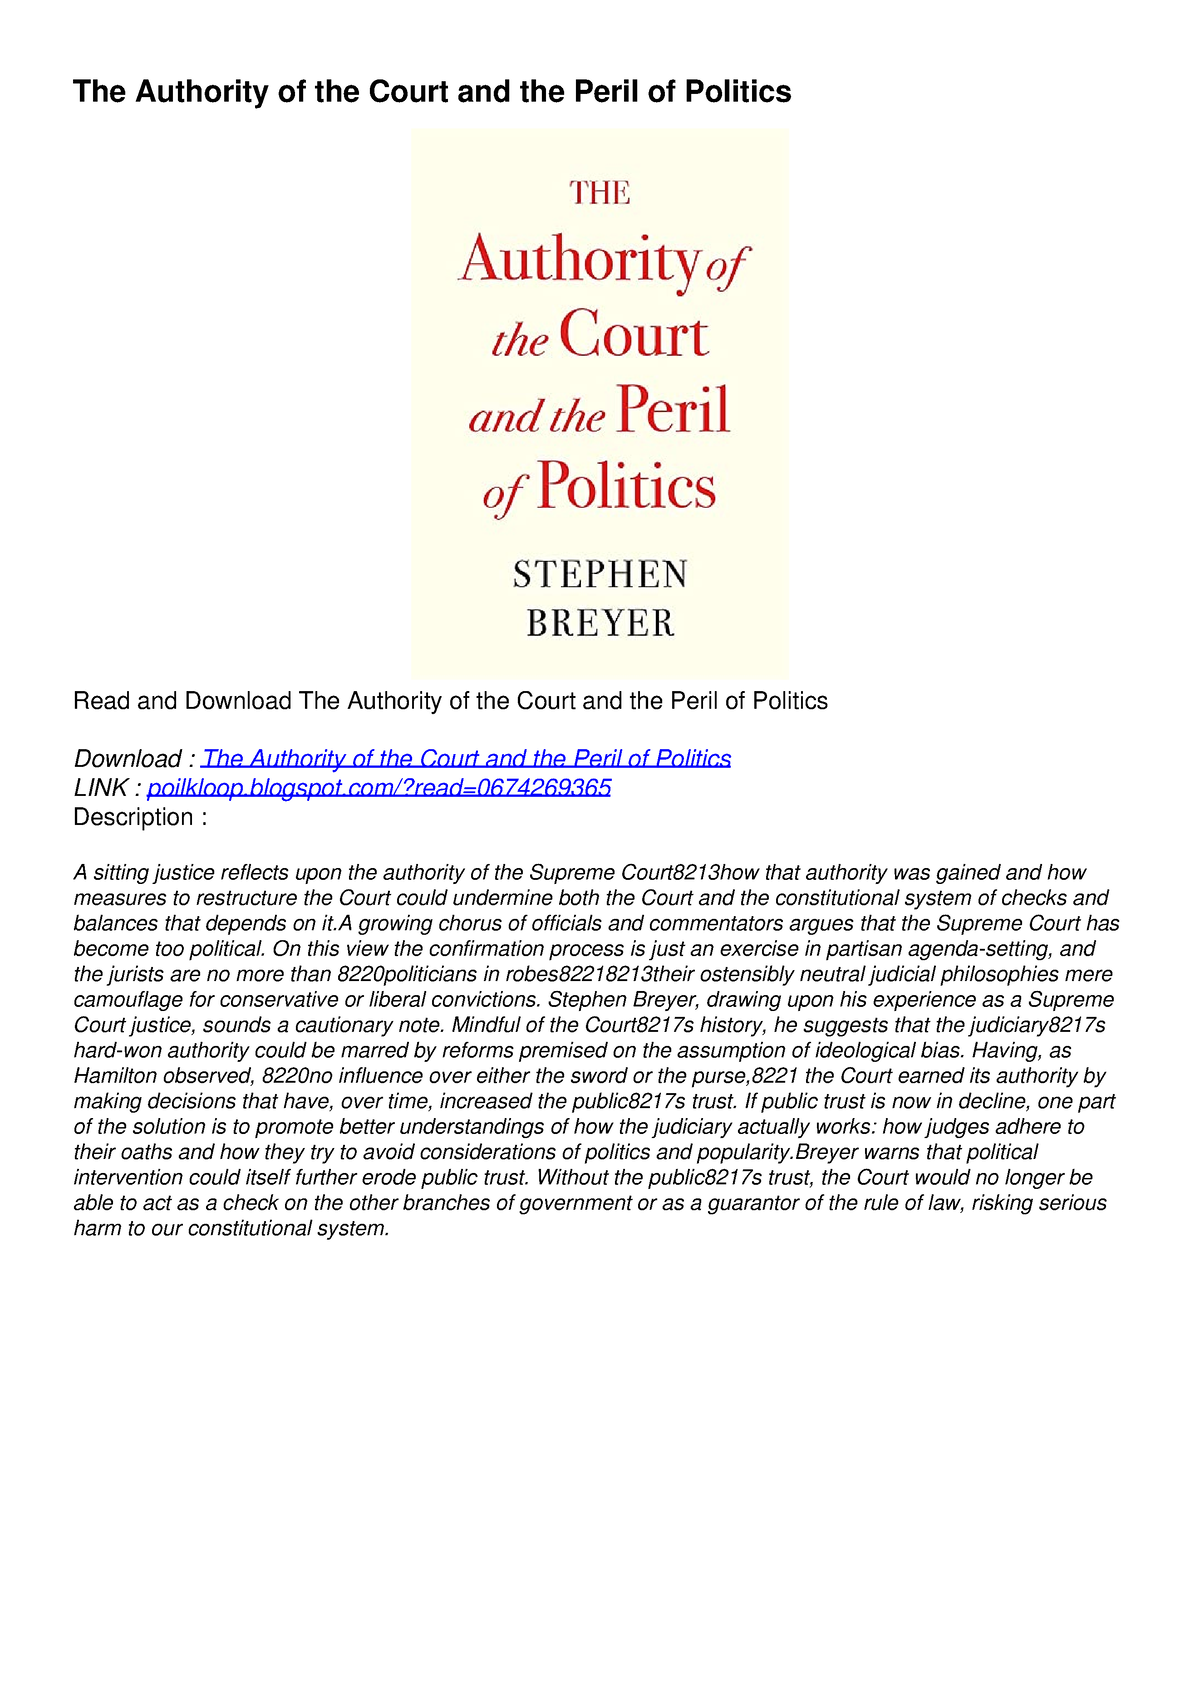 PDF The Authority of the Court and the Peril of Politics download The